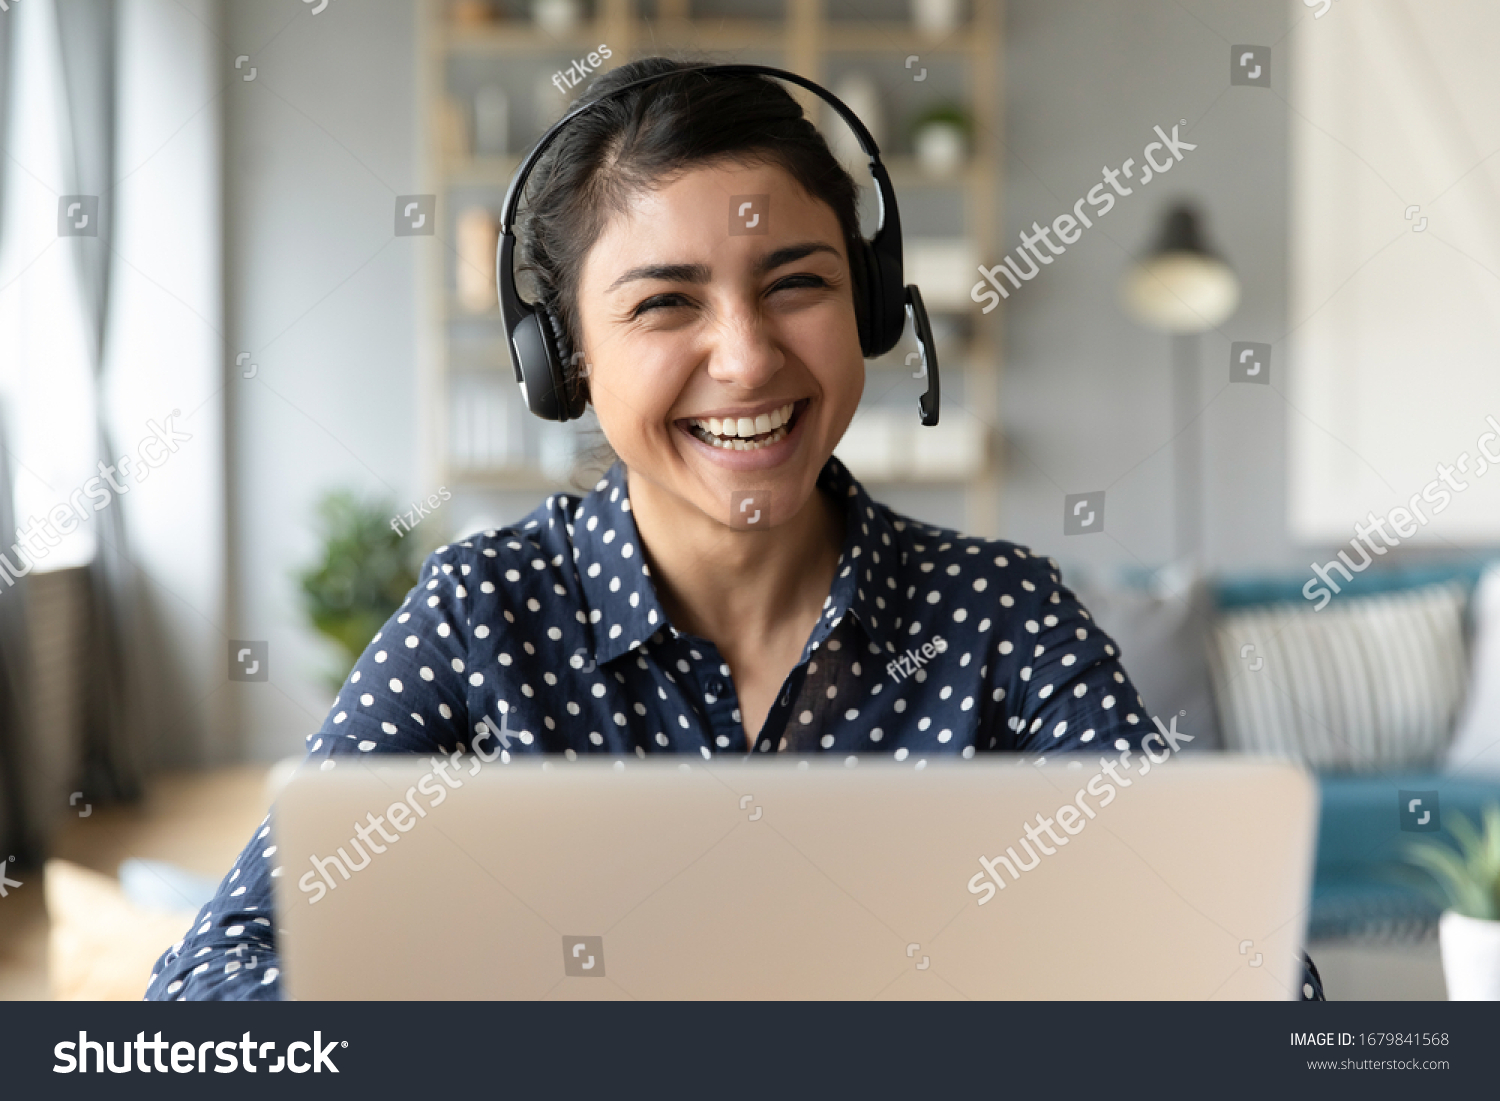 Head shot portrait smiling Indian woman wearing headphones posing for photo at workplace, happy excited female wearing headset looking at camera, sitting at desk with laptop, making video call #1679841568